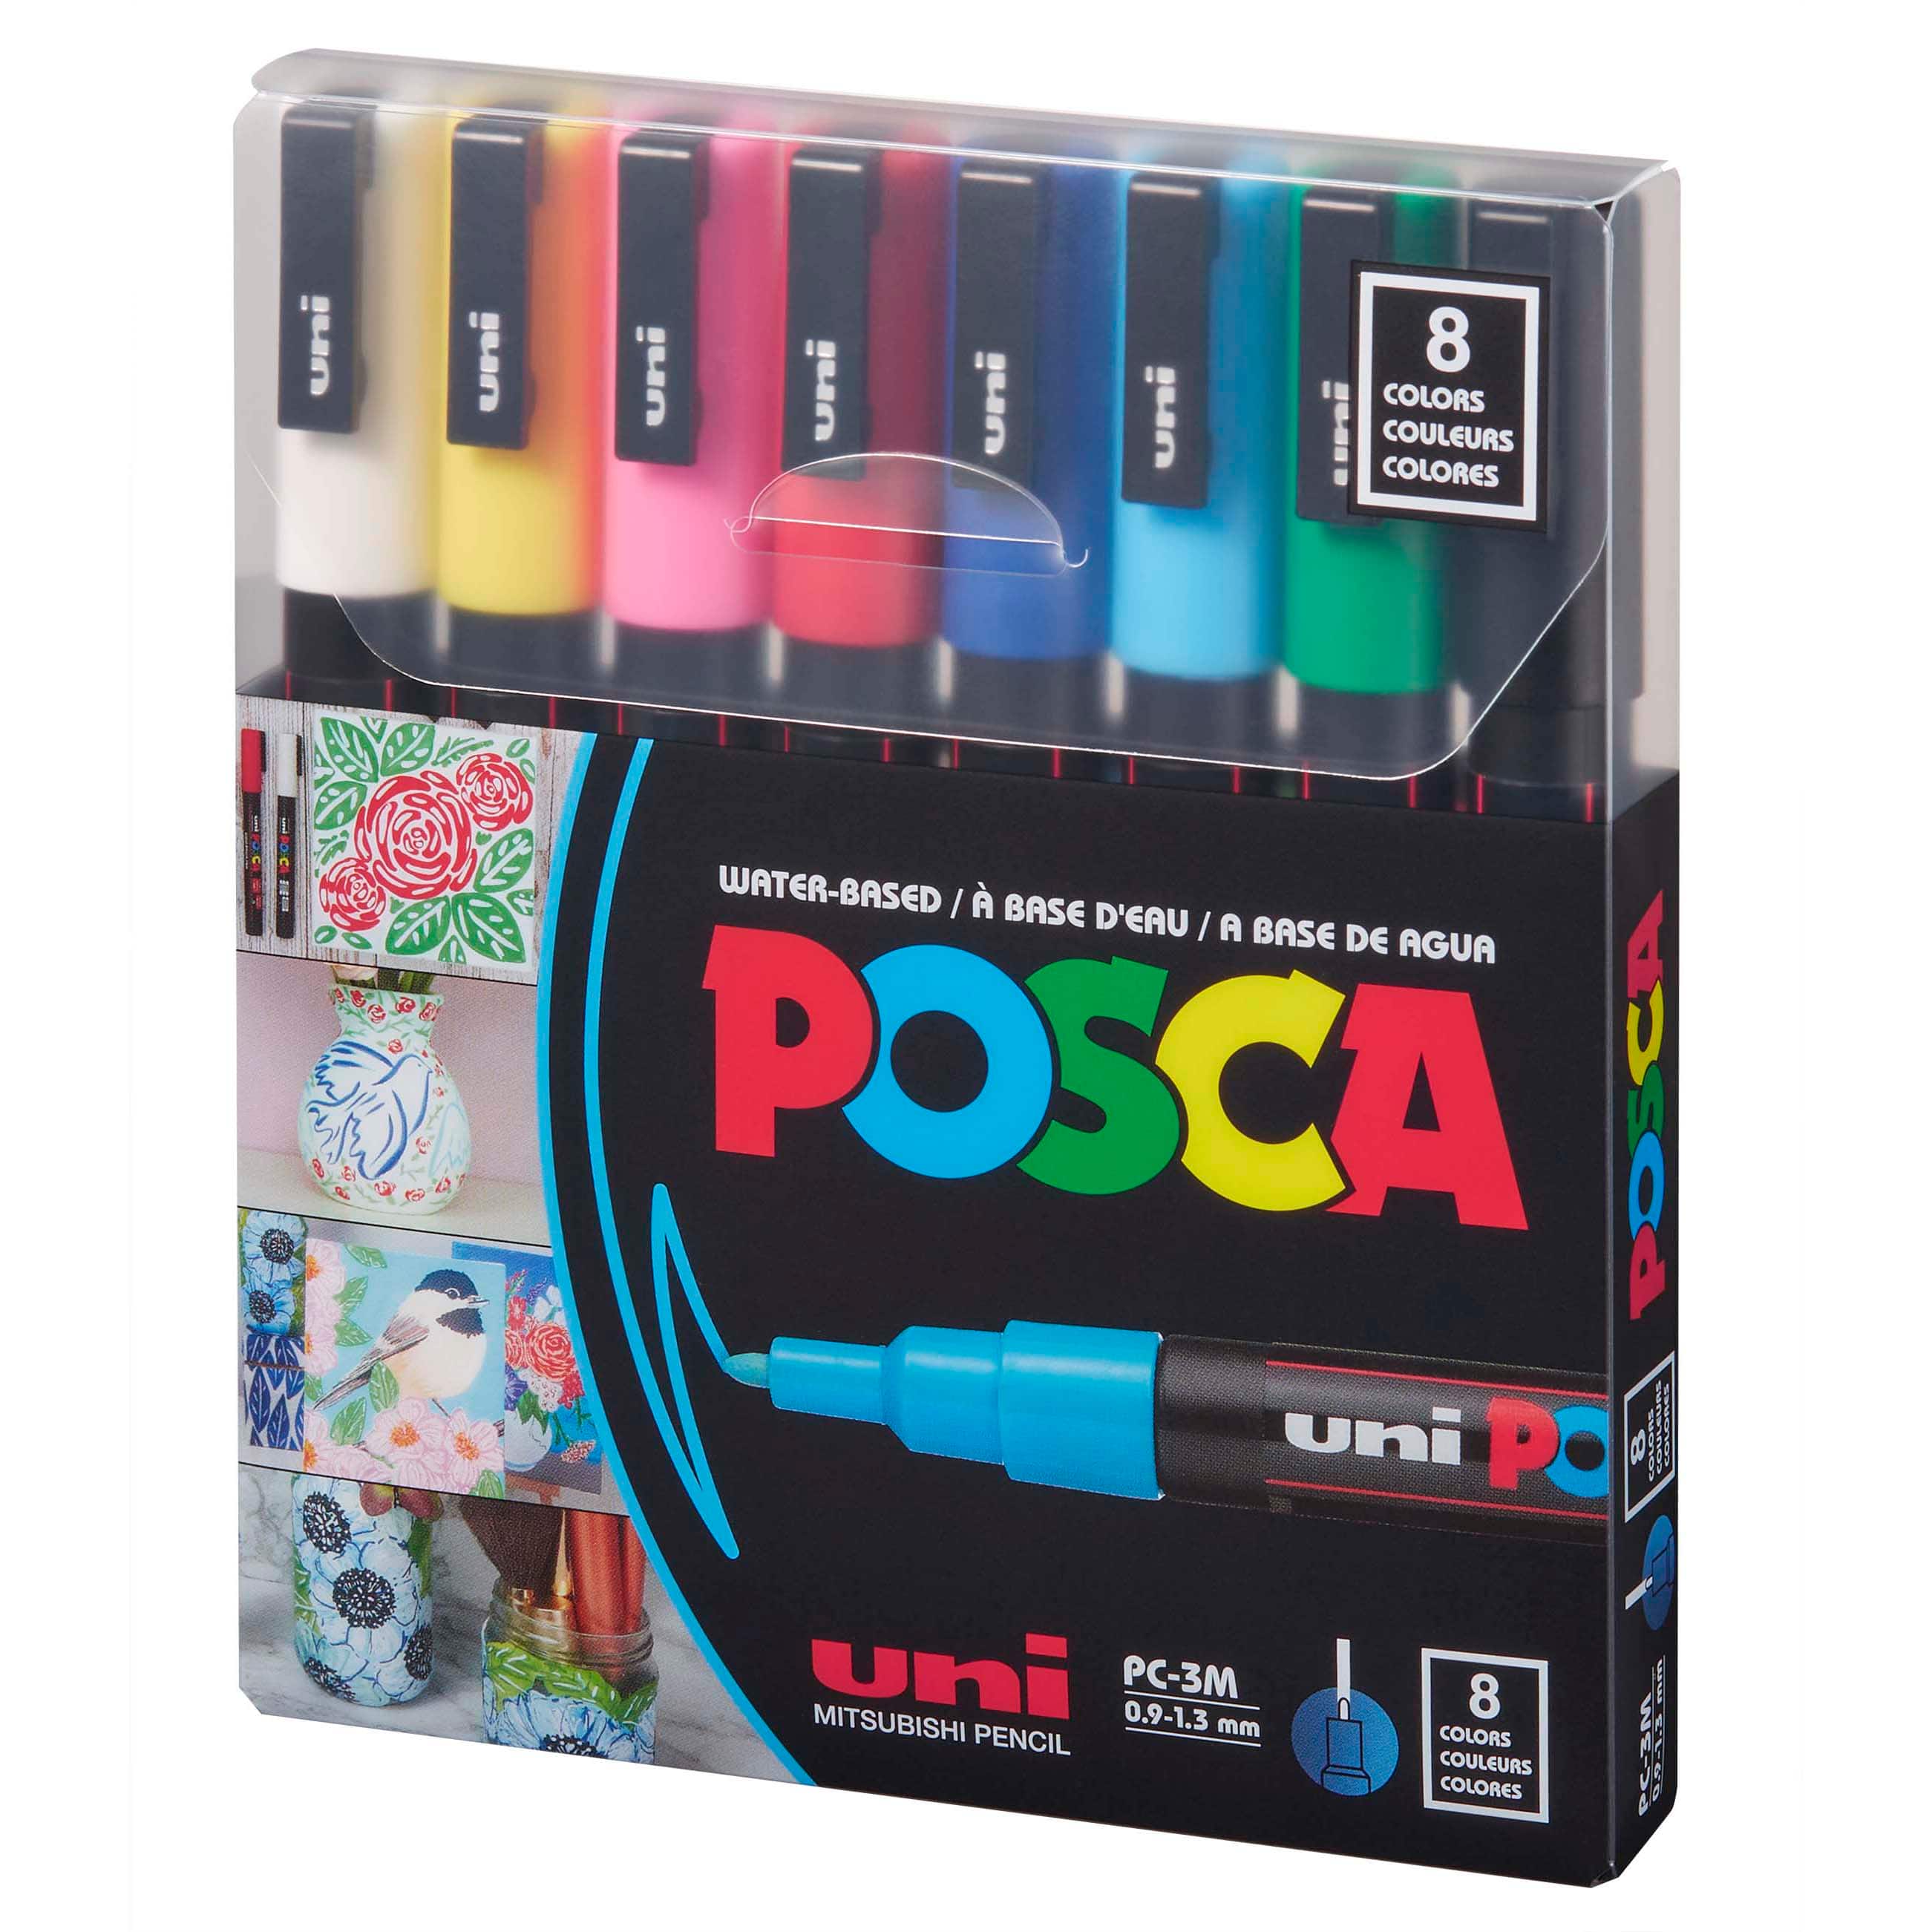  Posca PC-3M Permanent Marker Paint Pens. Fine Tip for Art &  Crafts. Multi Surface Use On Wood Metal Paper Canvas Cardboard Glass Fabric  Ceramic Rock Pebble Stone Porcelain. Set of 8